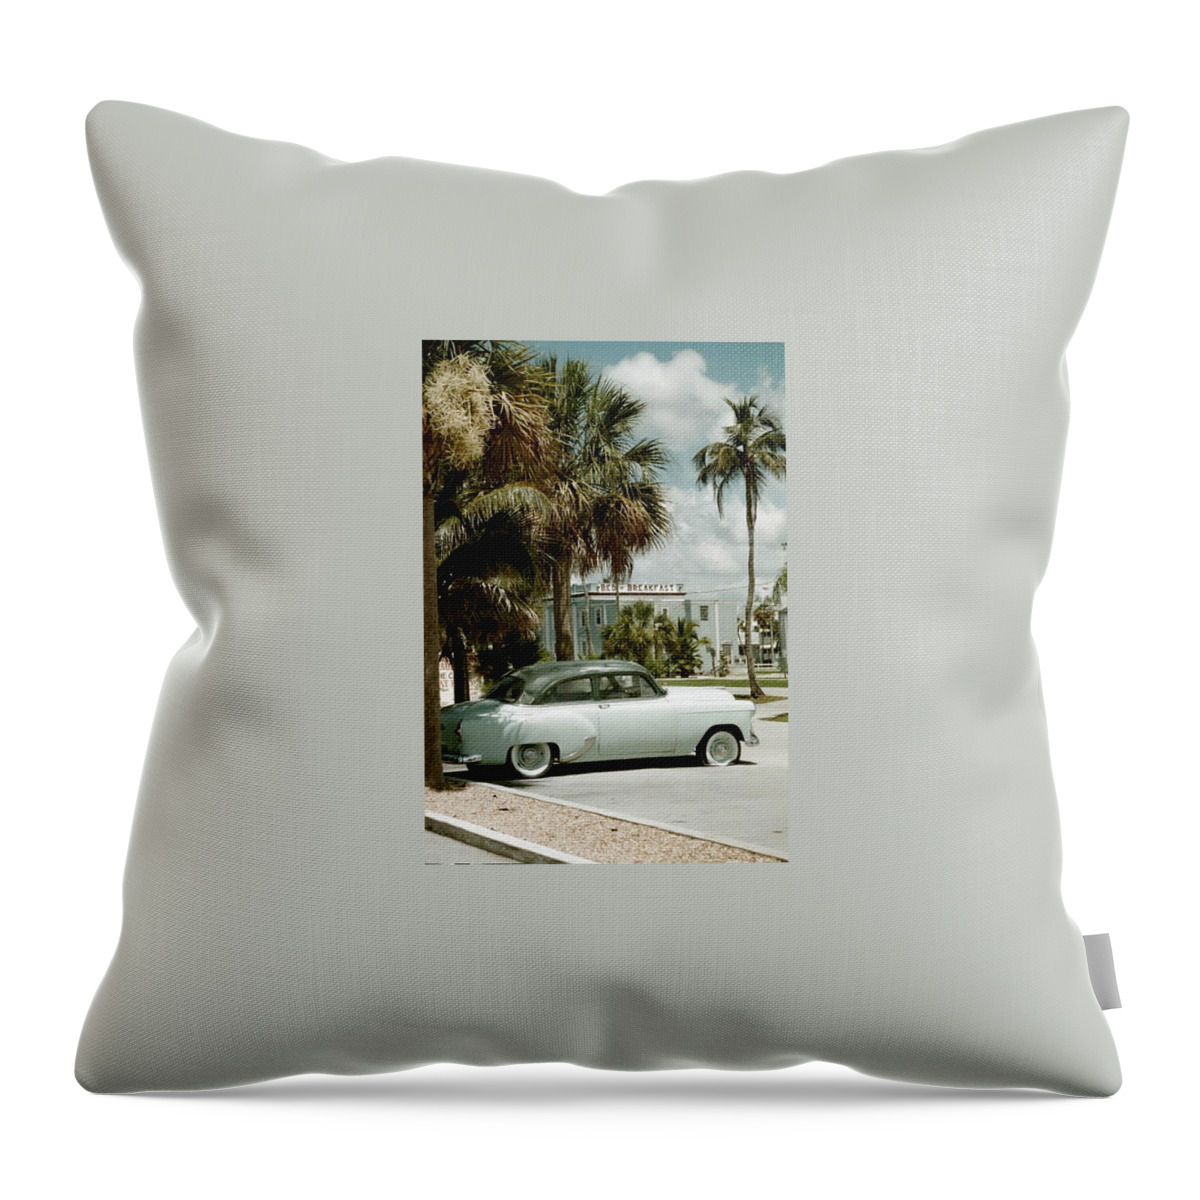 Everglade City Throw Pillow featuring the photograph Everglade City I by Flavia Westerwelle